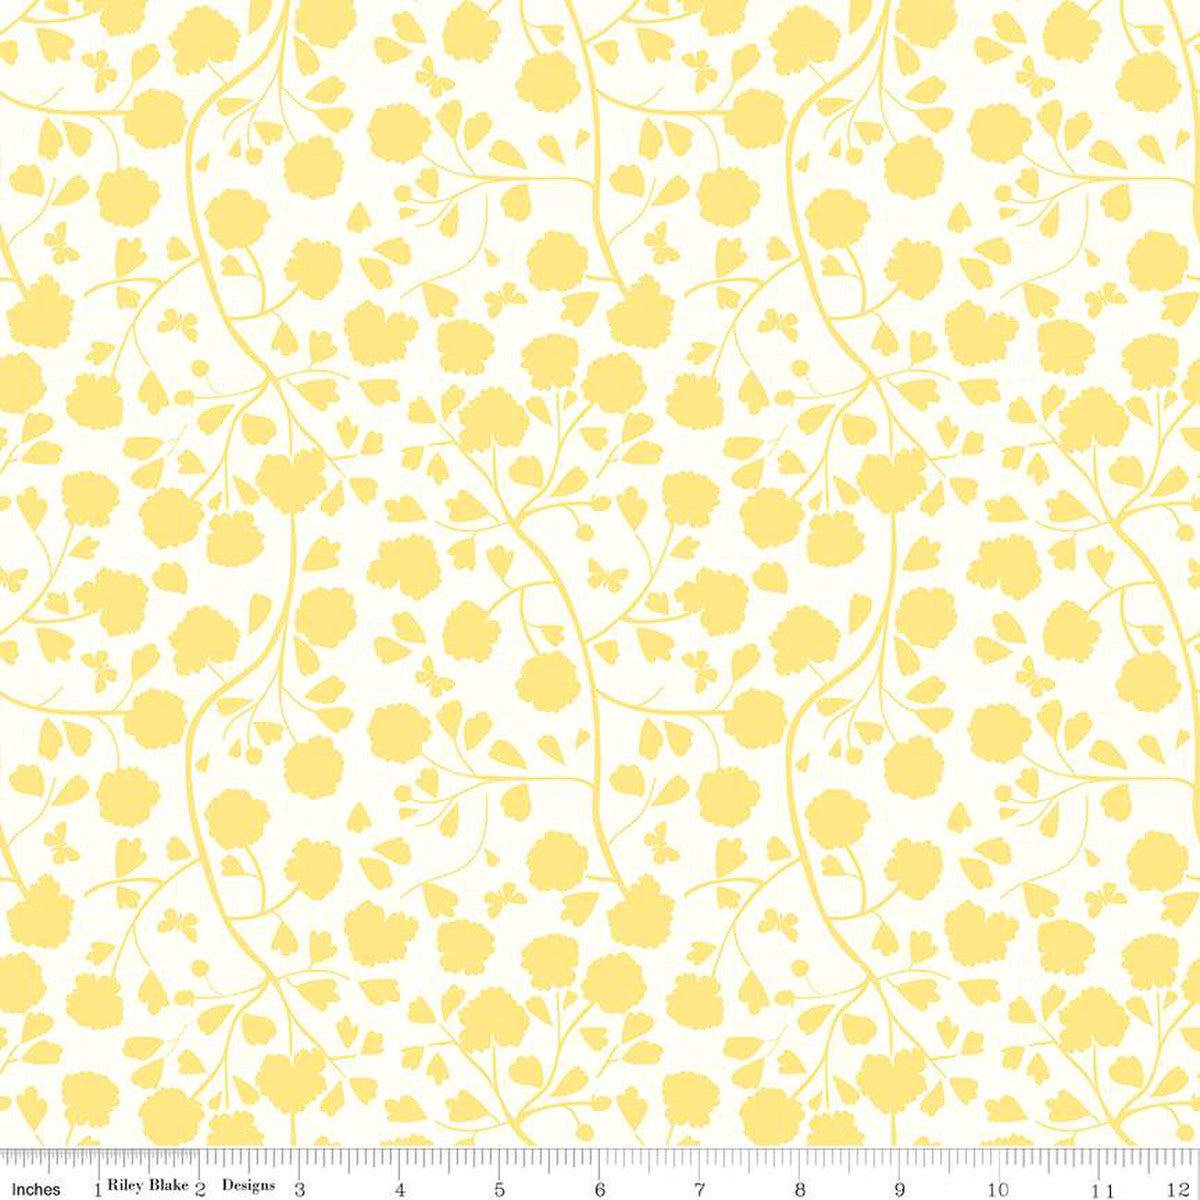 Jane Austen Emma Shadow Garden Print by Citrus + Mint for Riley Blake Designs Cream background soft faded golden yellow vines leaves and flowers beautiful high quality designer fabric for piecing quilts garments clothing bags and sewing projects material